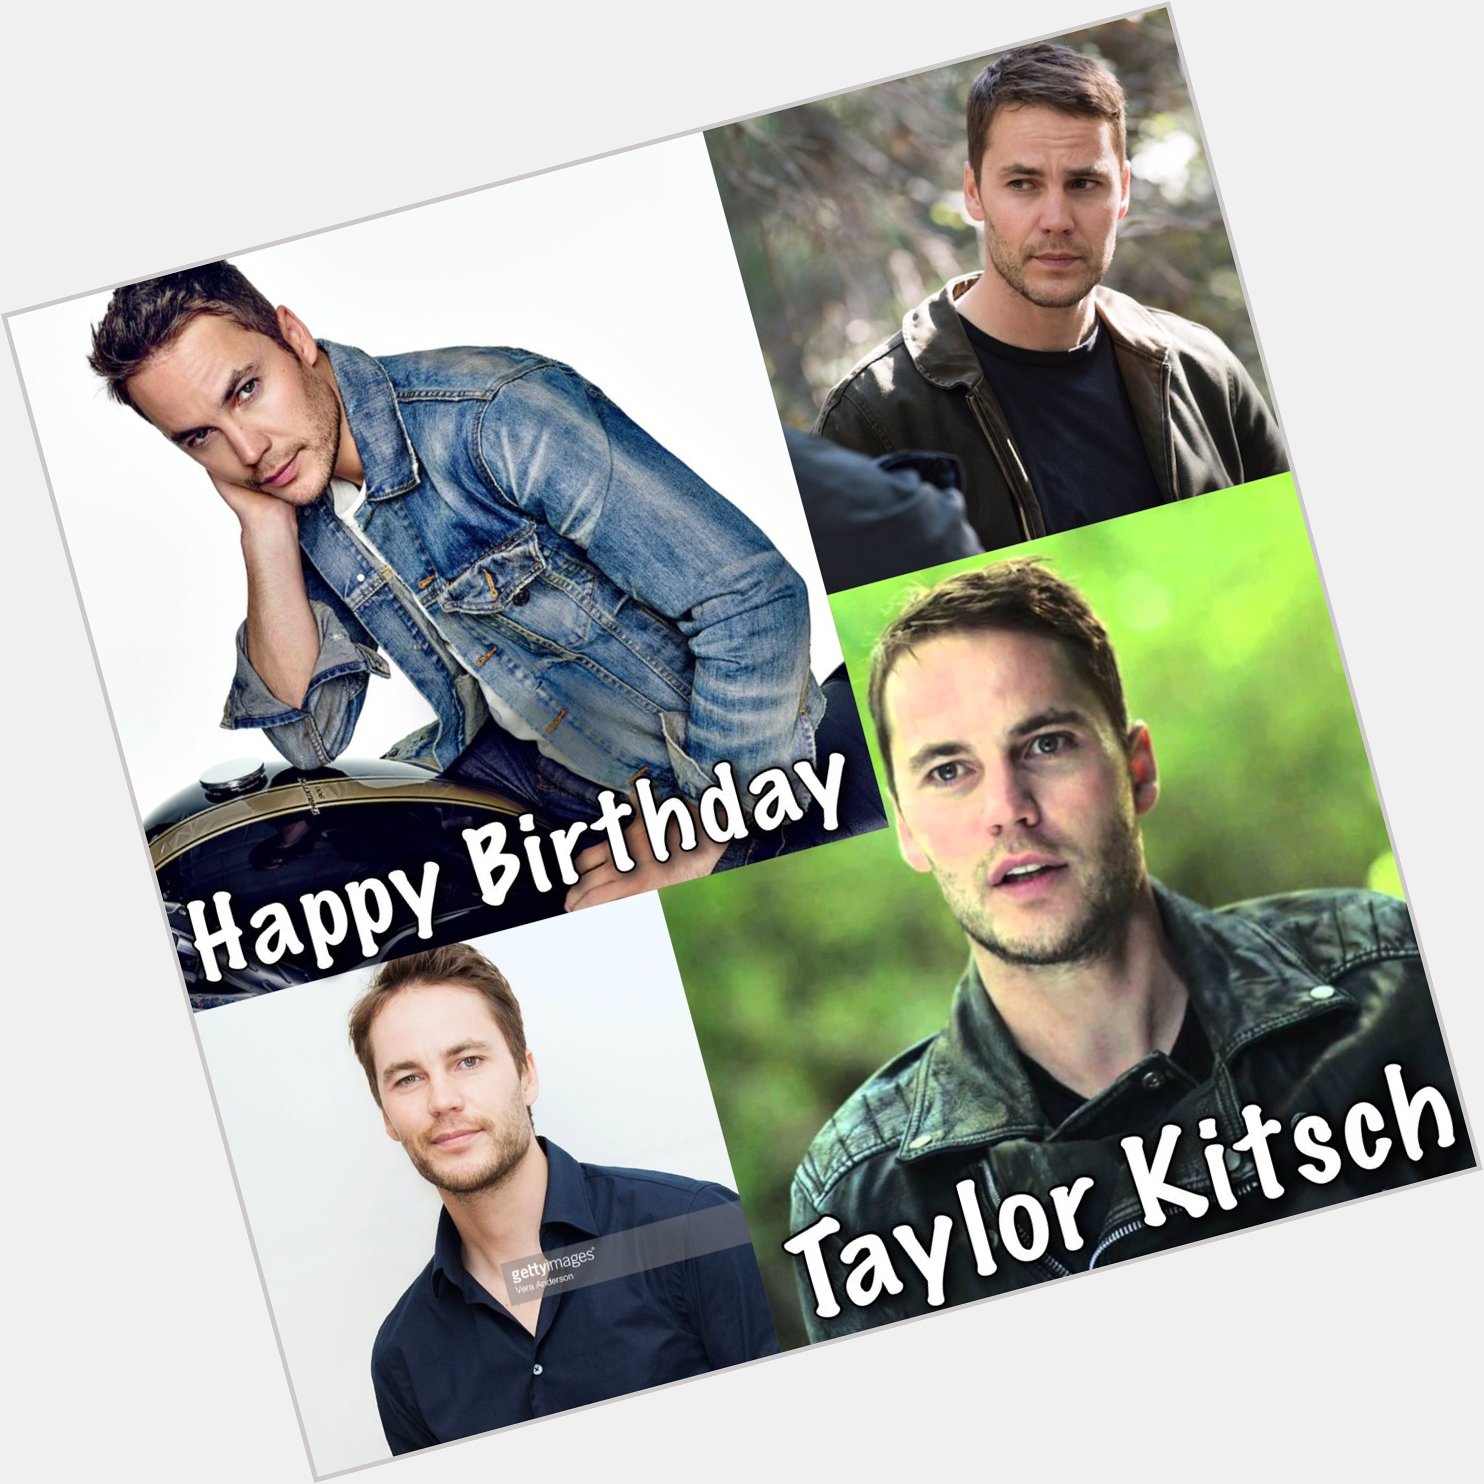 Happy birthday taylor kitsch I hope you have a good day with with family & friends 